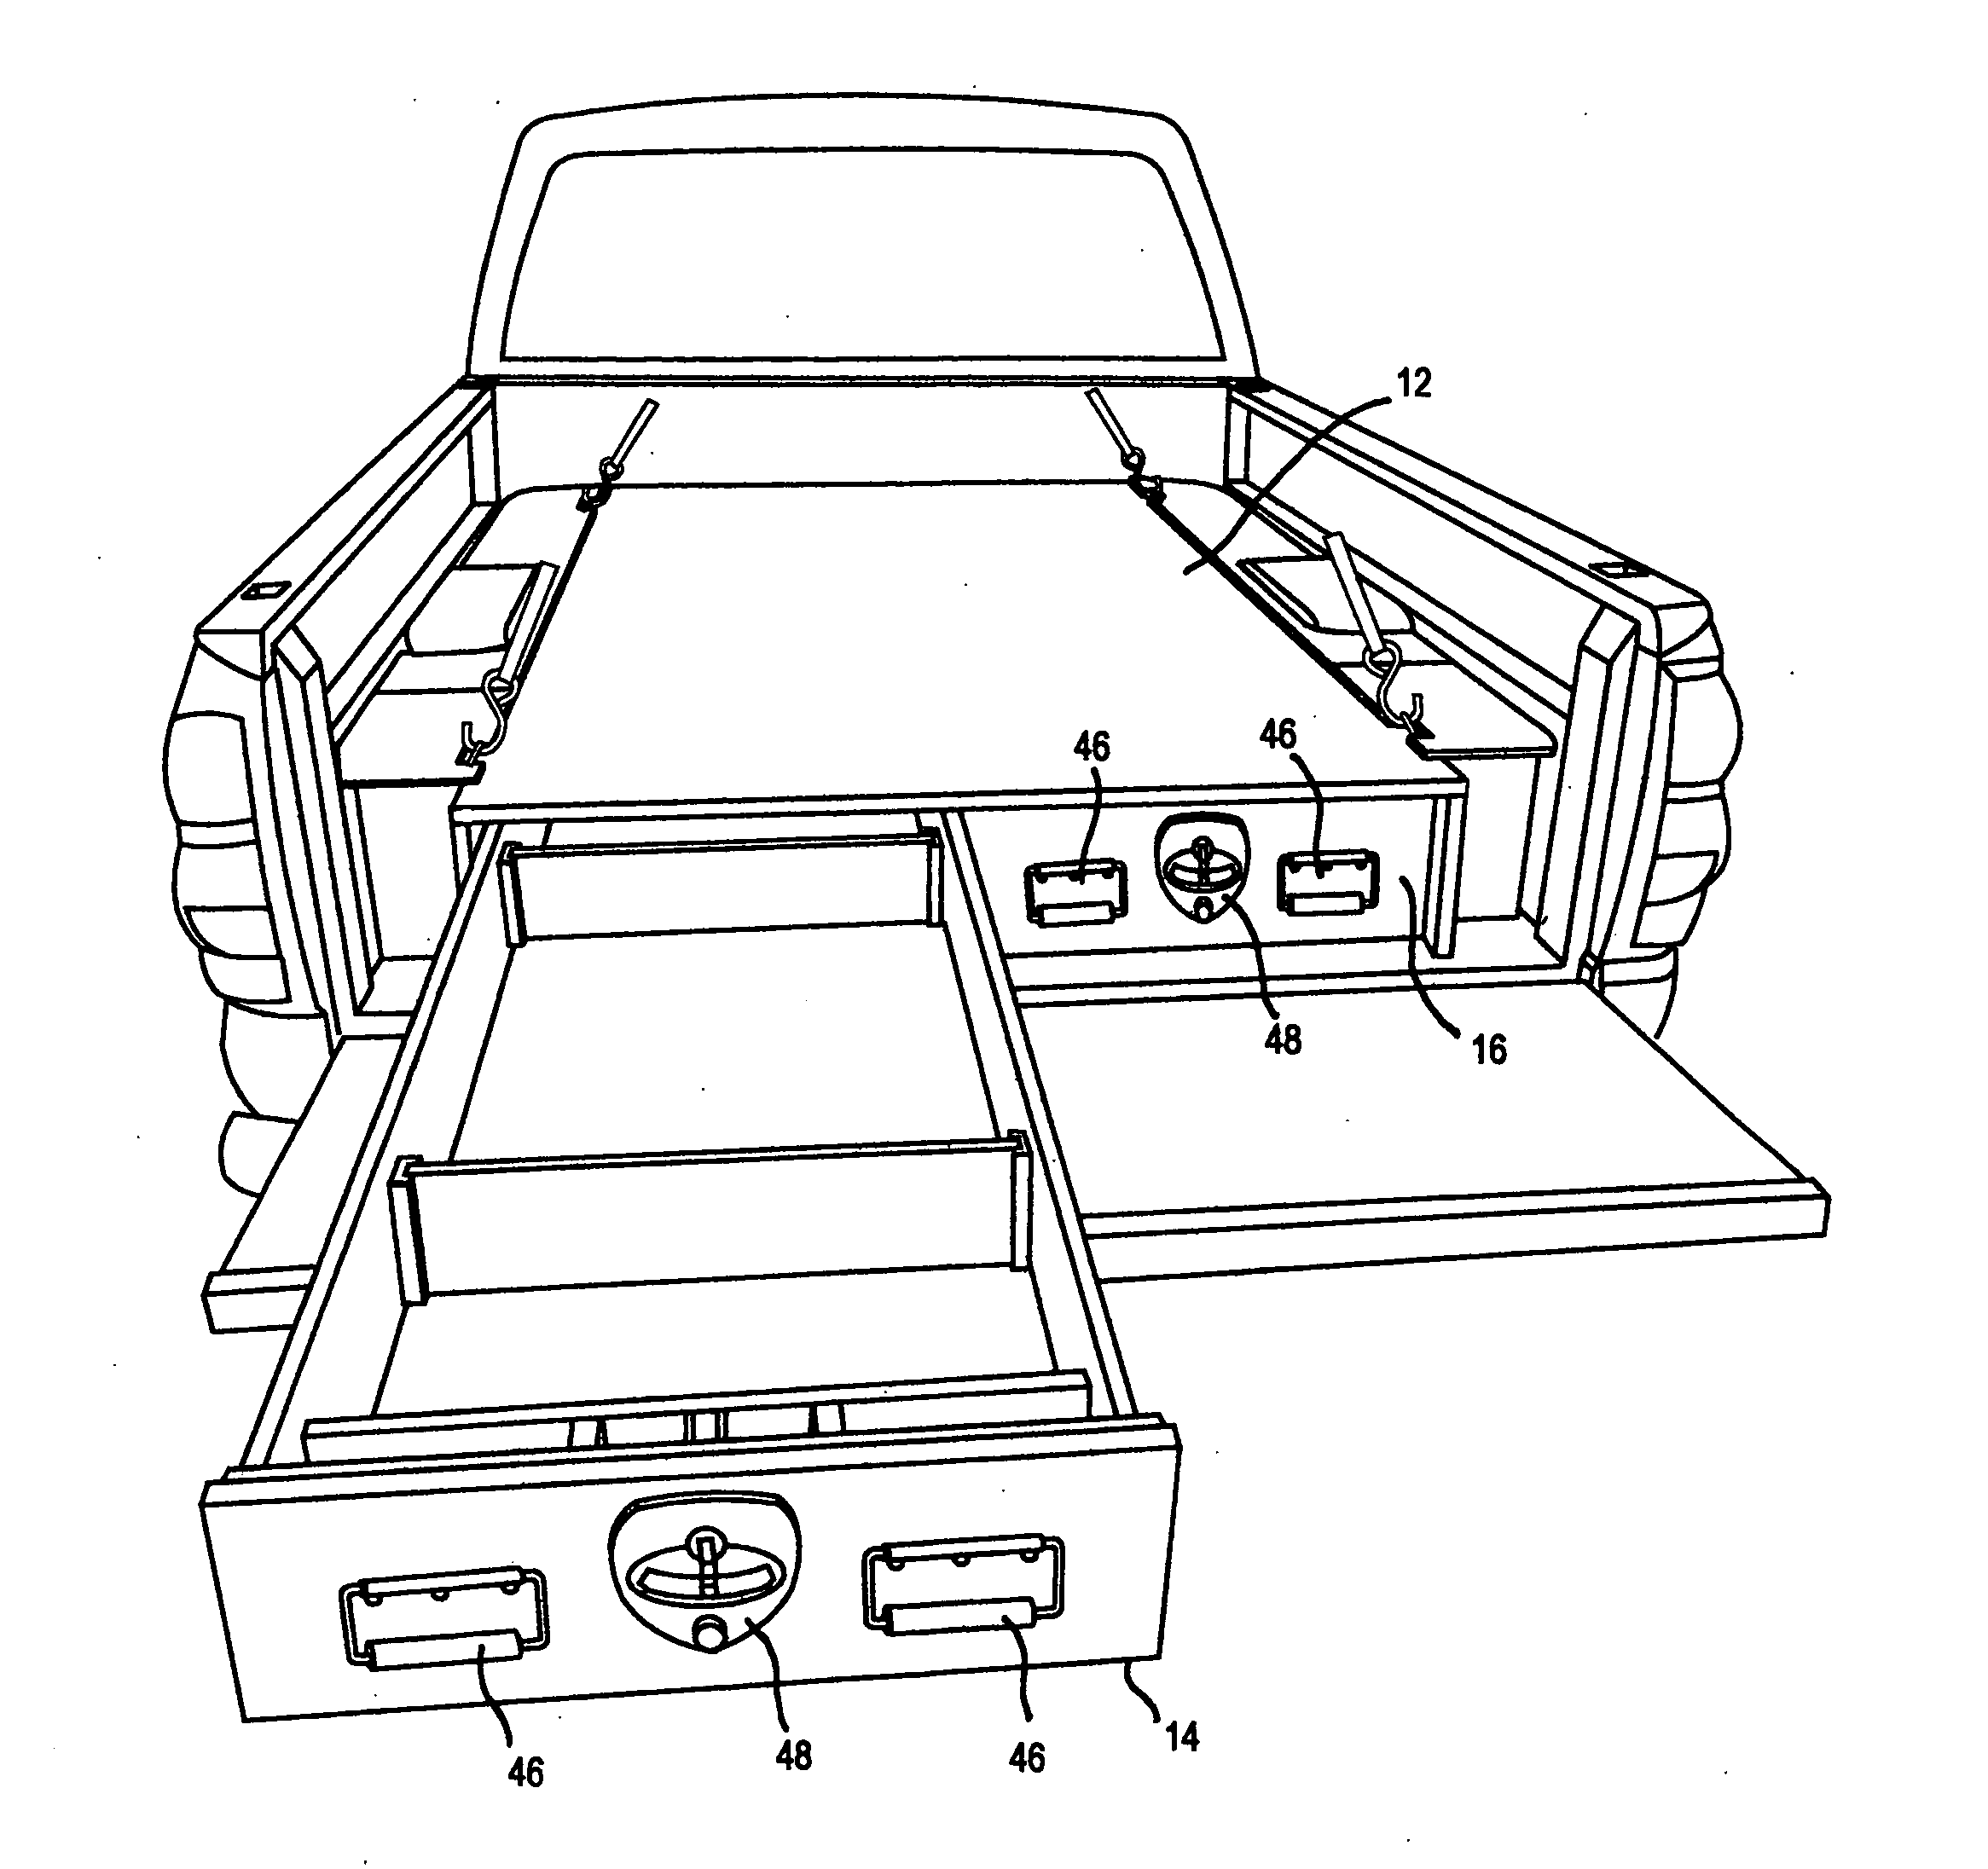 Water-resistant storage system for pickup trucks and utility vehicles